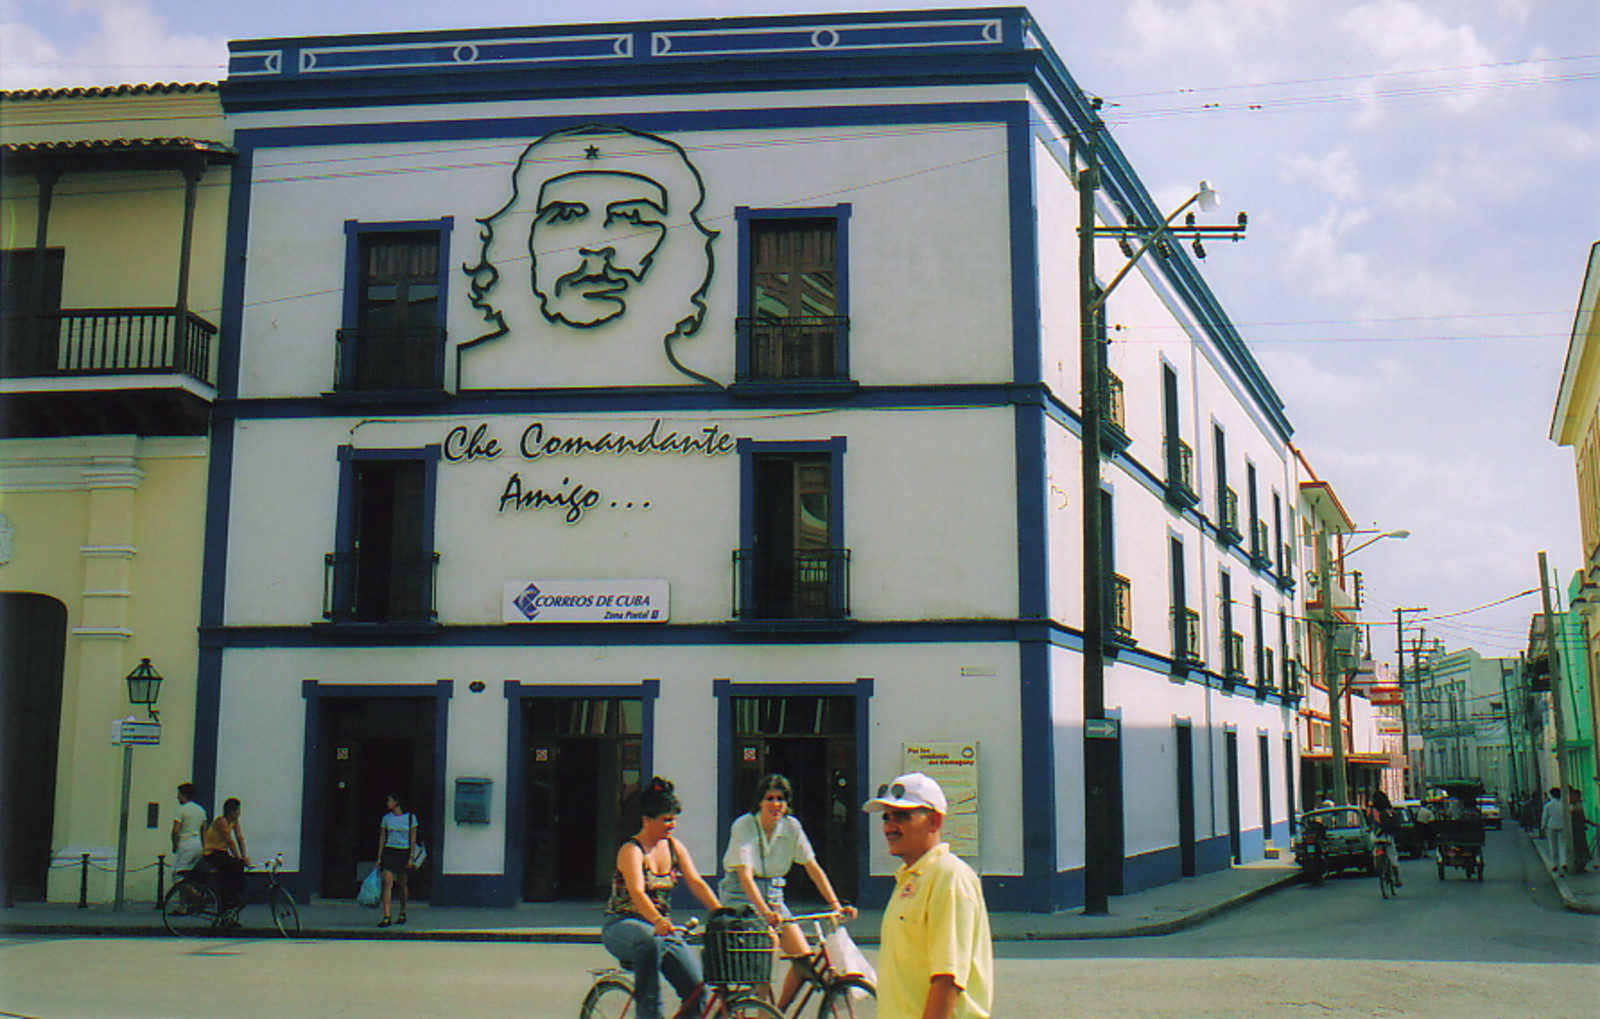 A picture of Che Guevara on the main post office in Camagüey